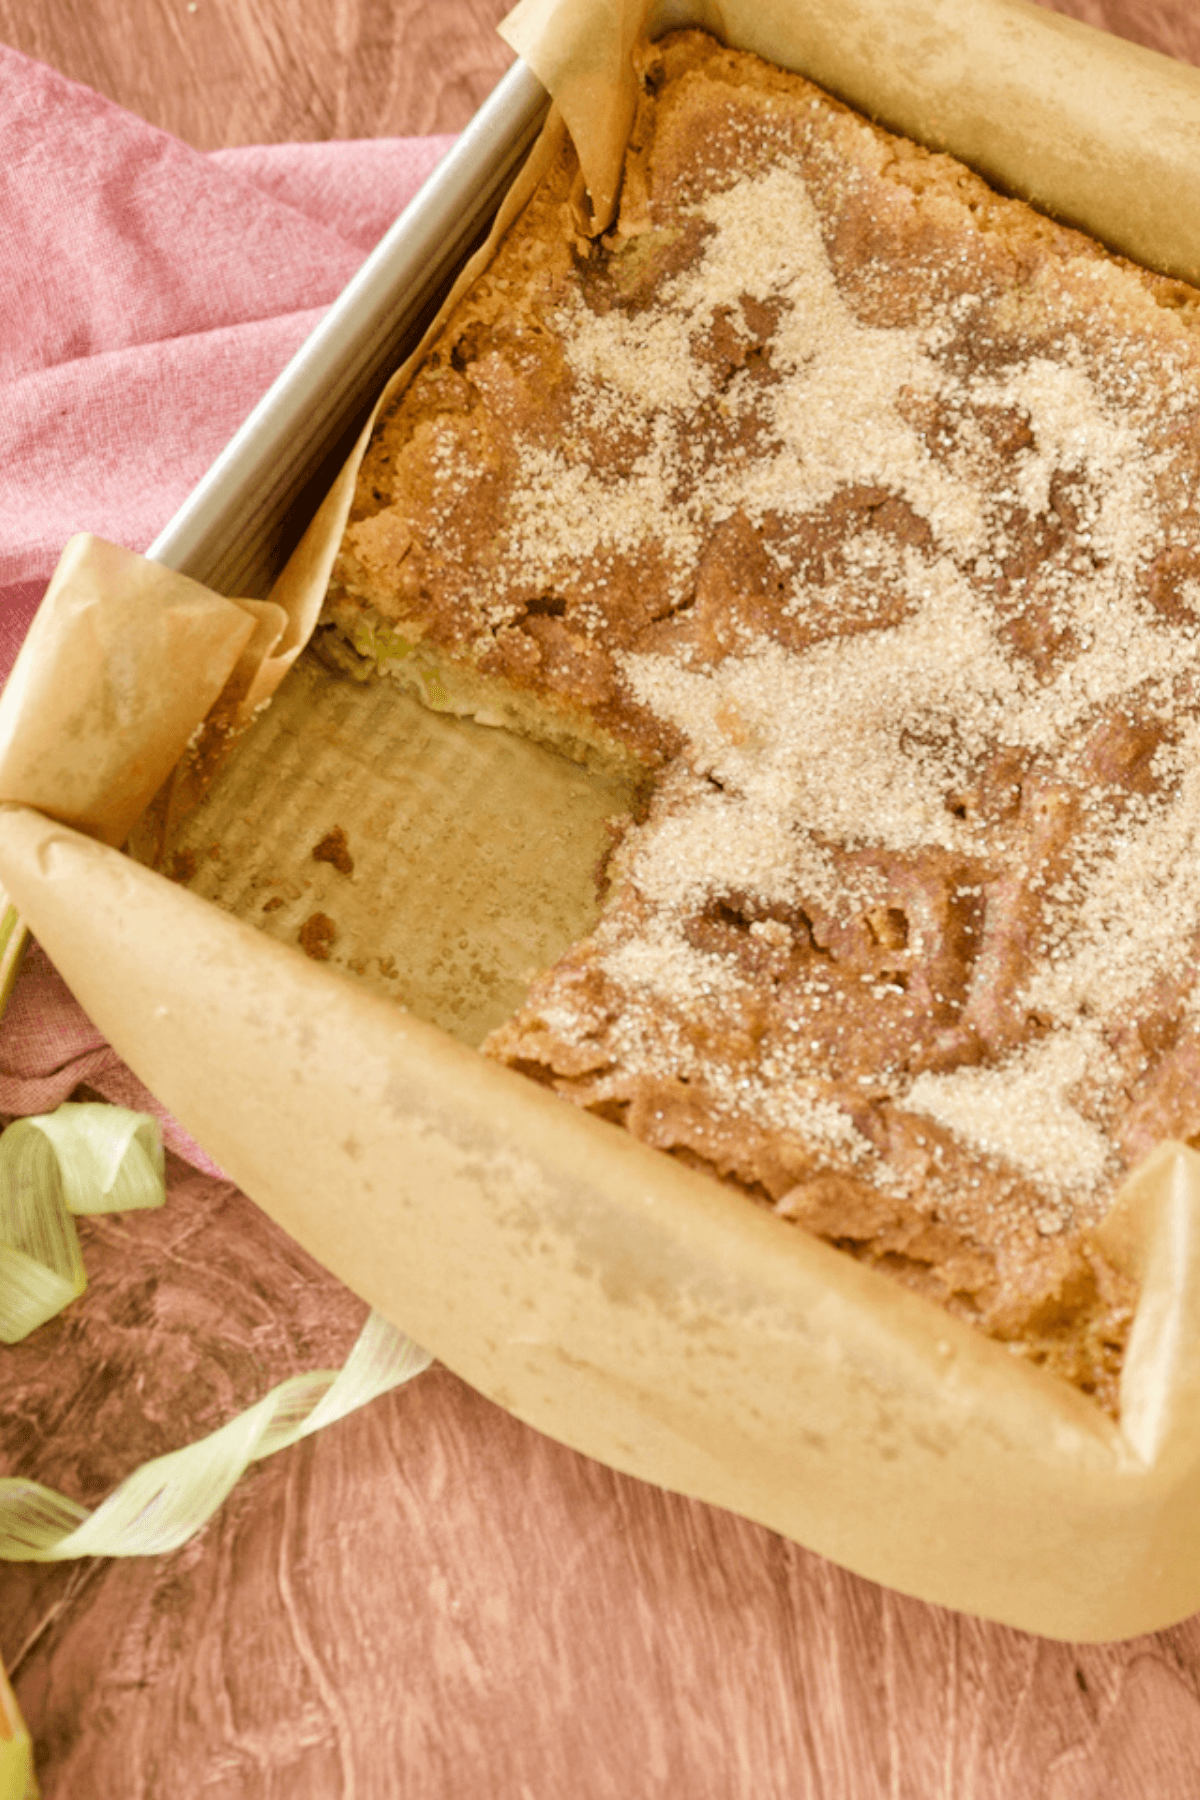 Image of 8x8 pan filled with baked rhubarb coffee cake with one slice removed and ribbons of rhubarb nearby.